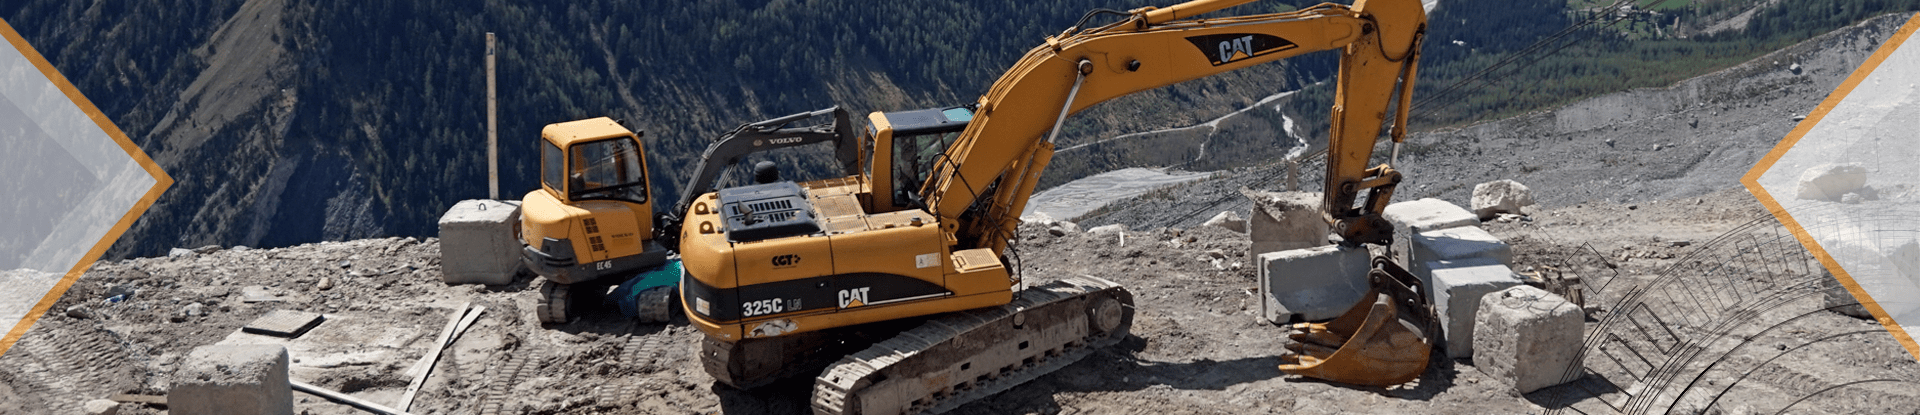 5 practical tips to maintain the undercarriage of your machinery